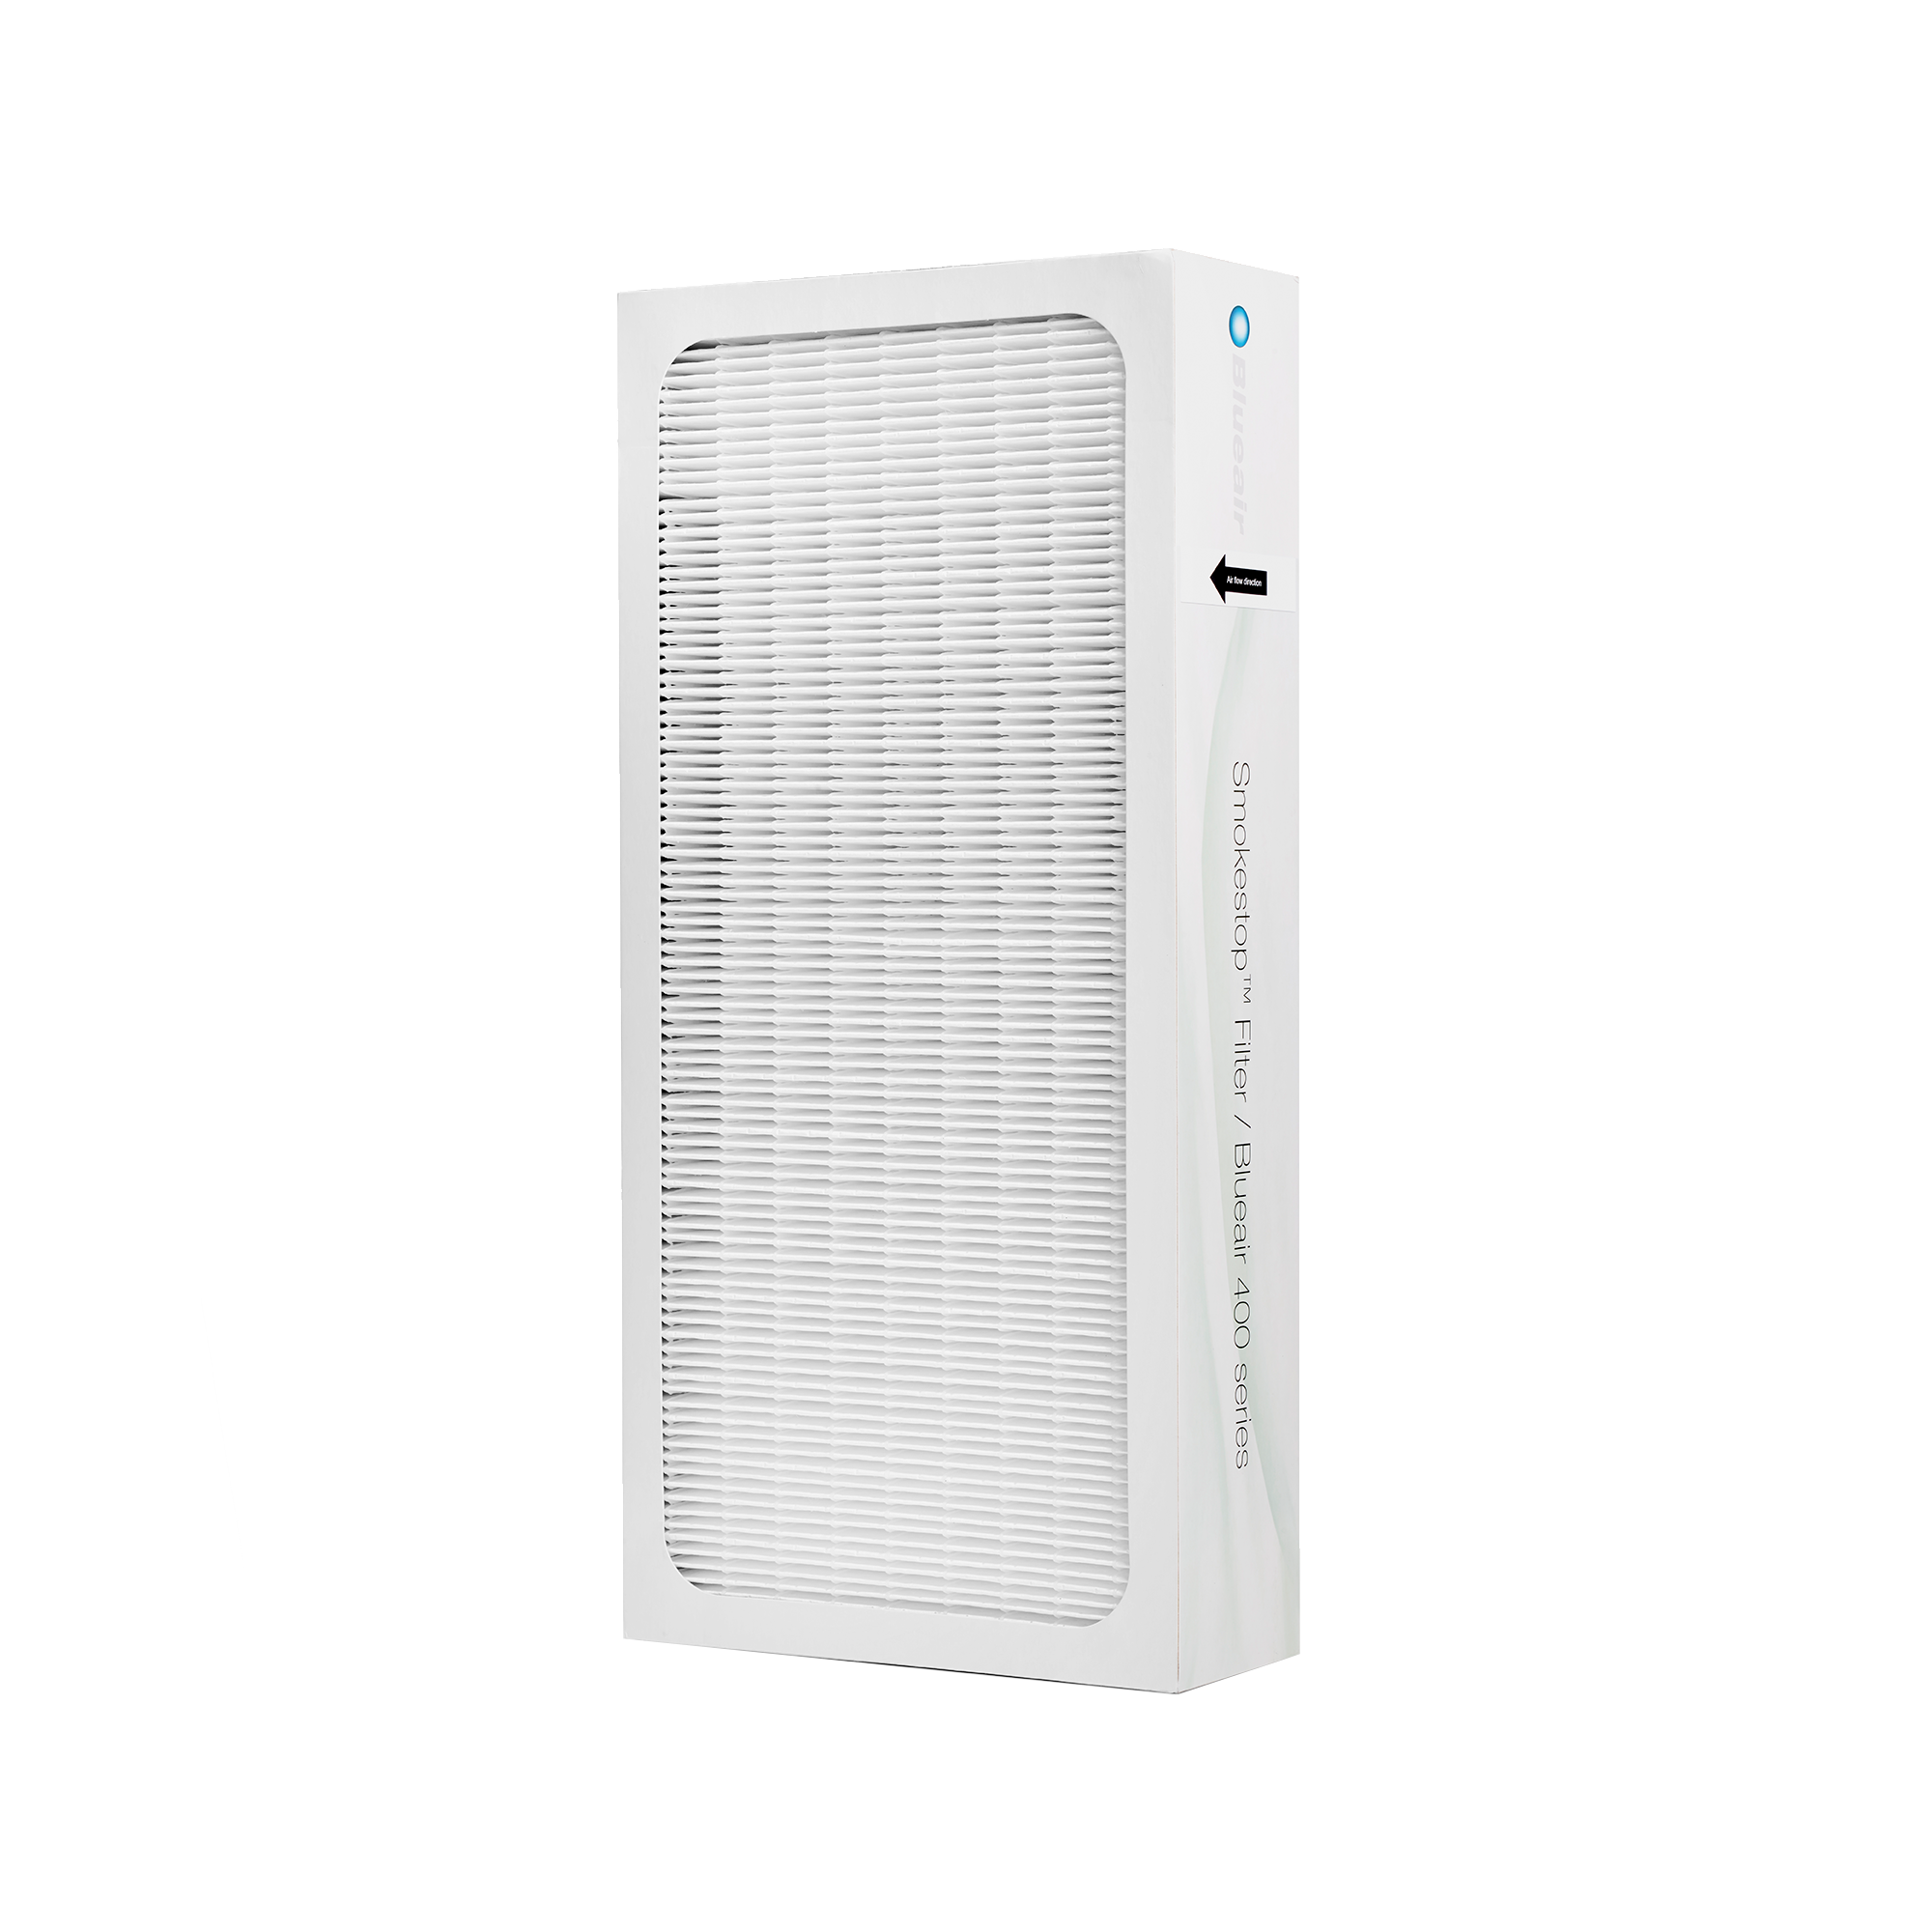 Photos - Air Conditioning Filter Blueair Classic 400 Series Particle Filter 